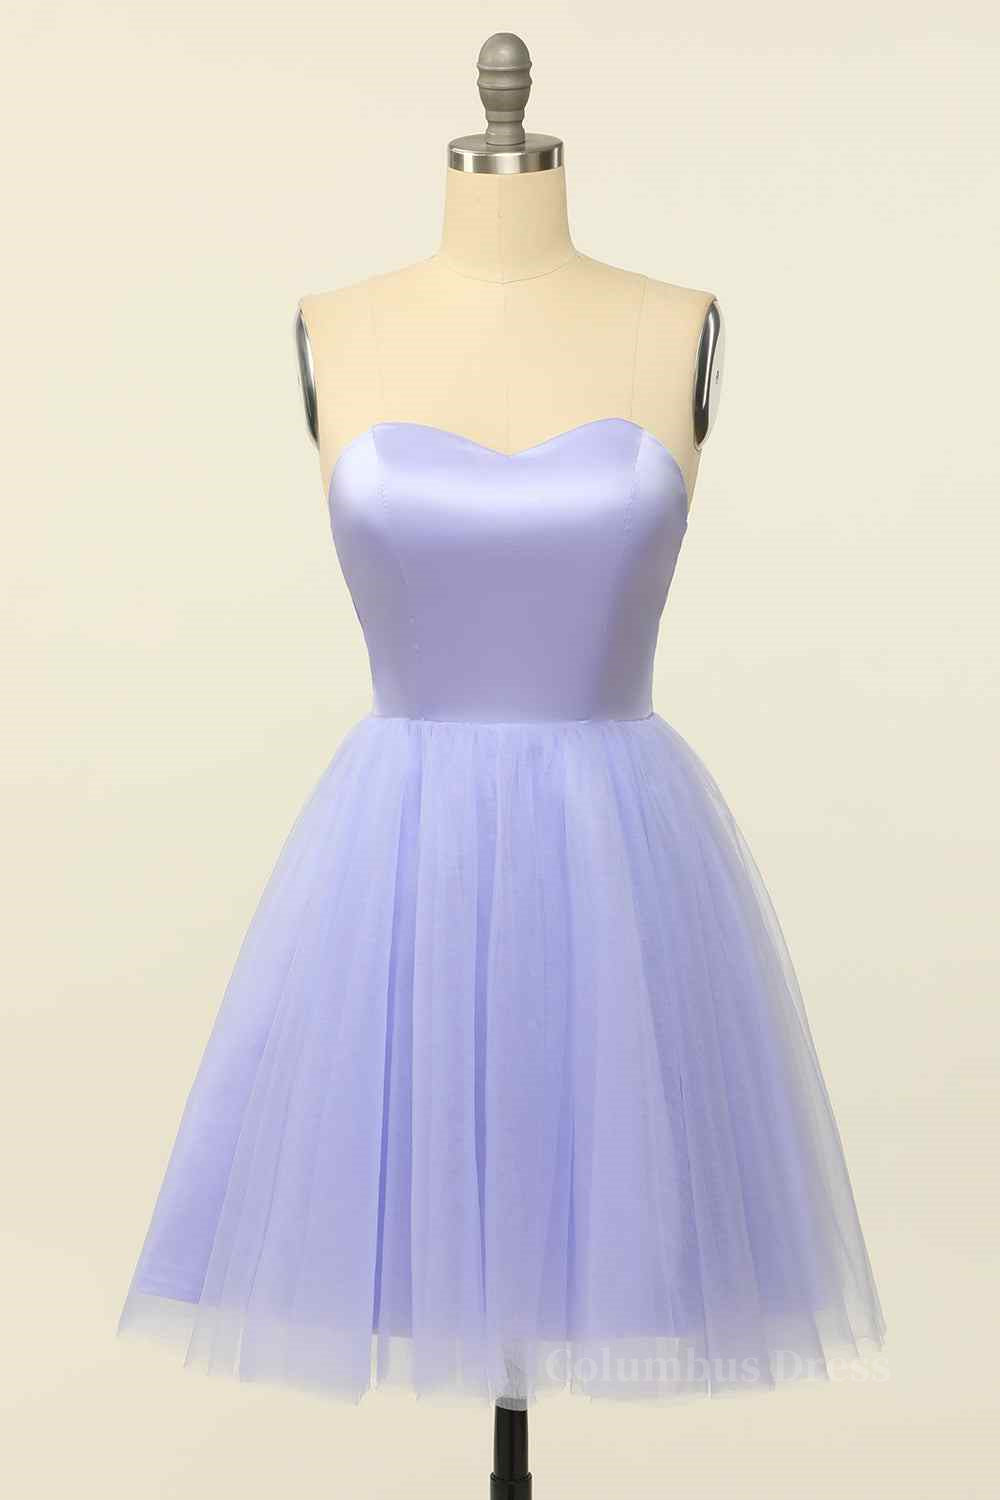 Lilac A-line Strapless Sweetheart Lace-Up Back Mini Corset Homecoming Dress outfit, Dinner Outfit